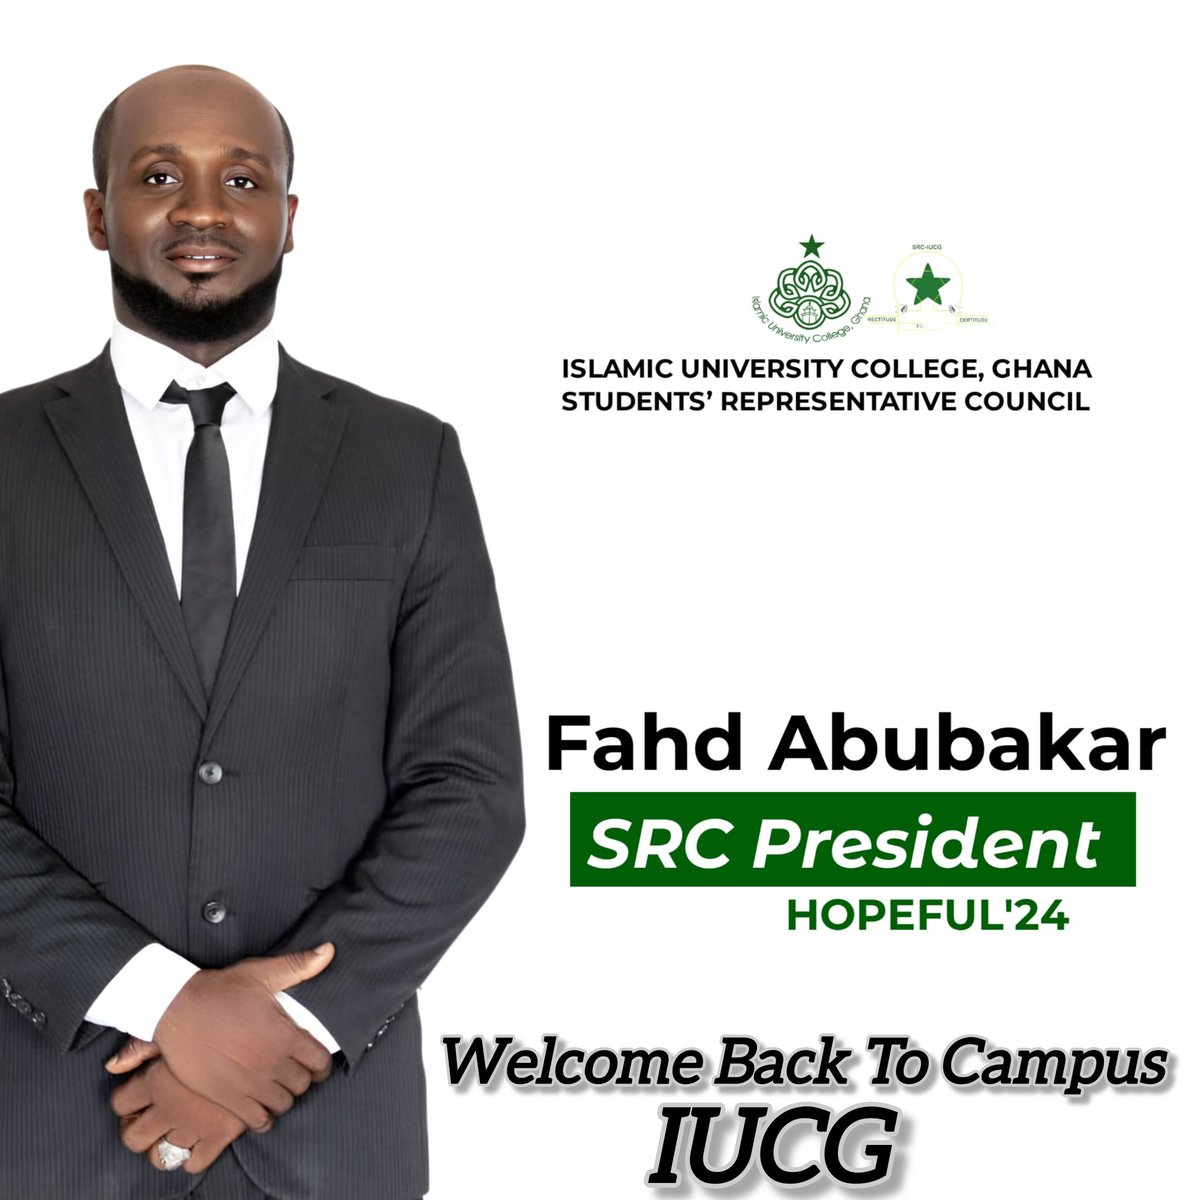 I have always believed that when you have a voice, you have an obligation to use that voice to empower others. I AM THE VOICE. FAHD ABUBAKAR SRC PRESIDENT HOPEFUL 24, ALL FOR ONE ... ONE FOR ALL HUMBLE 📌COMPETENT📌 TRUSTED @srciucg #TheHoodBlogger